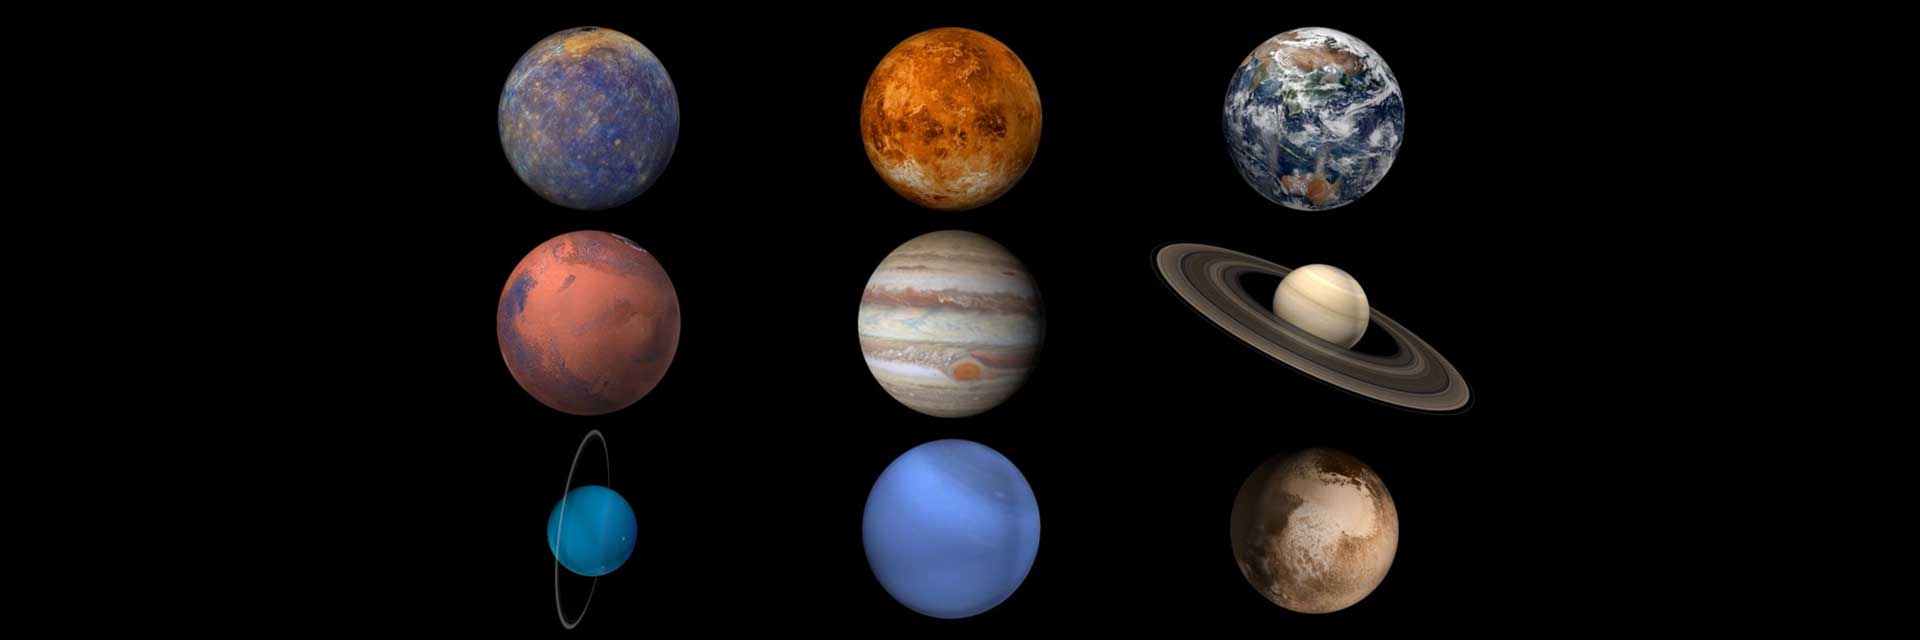 Illustration of eight planets and one dwarf planet displayed three across and three down.